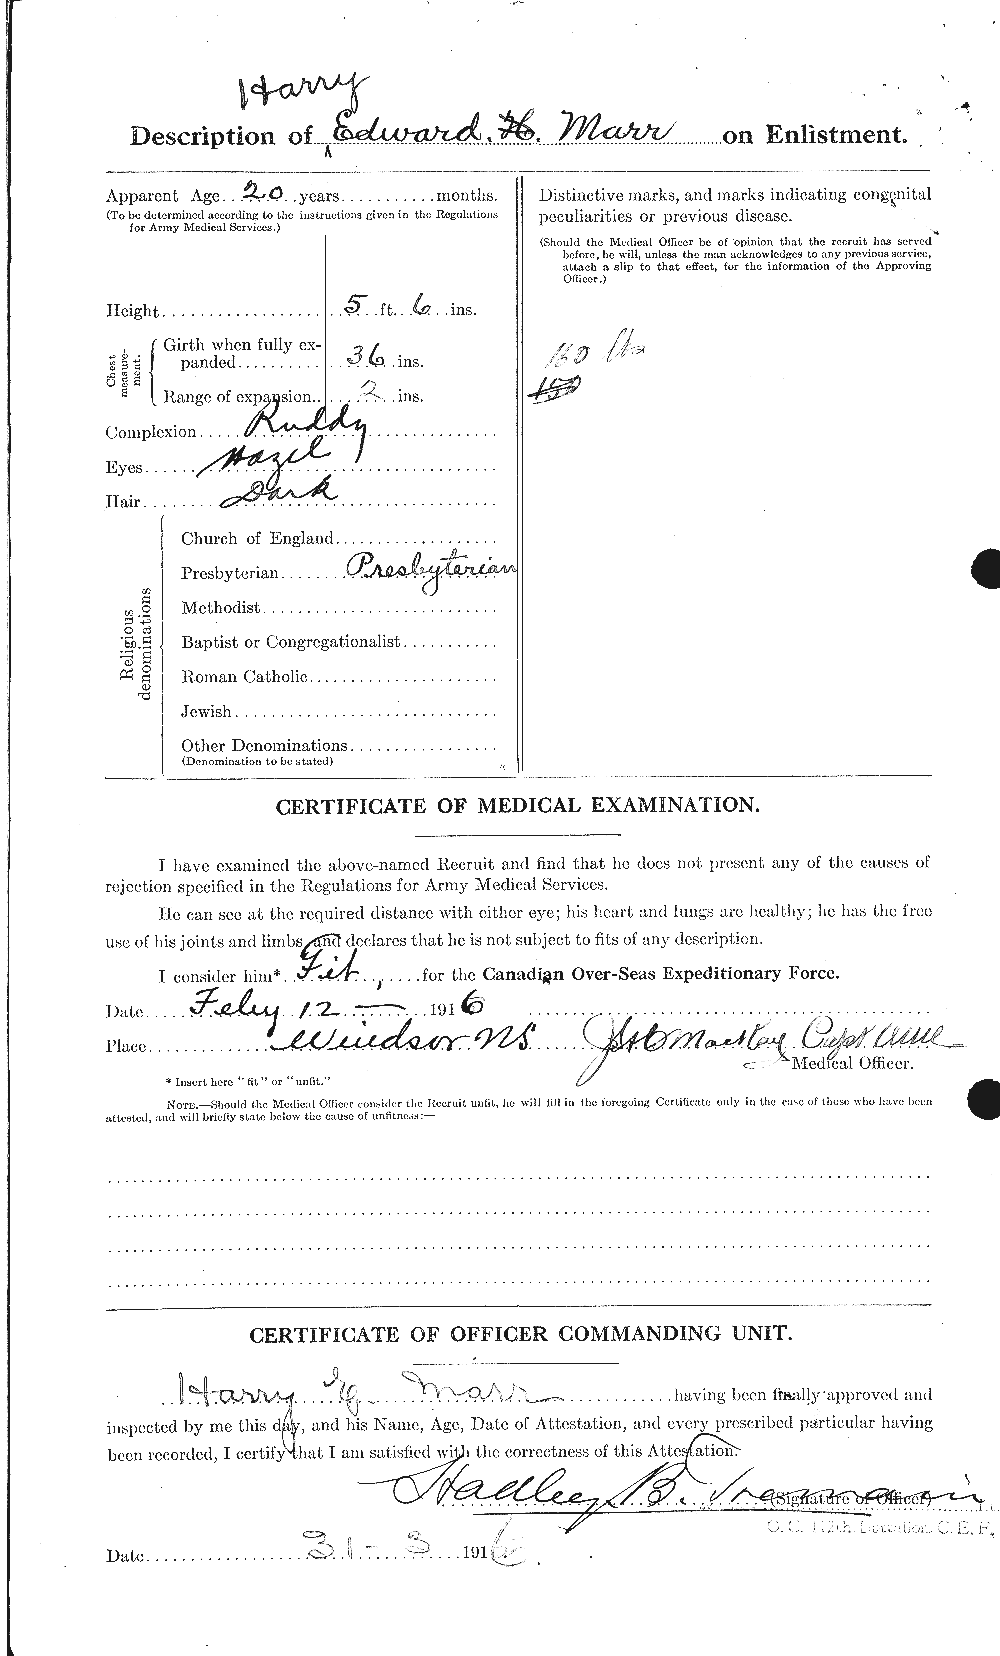 Personnel Records of the First World War - CEF 485636b